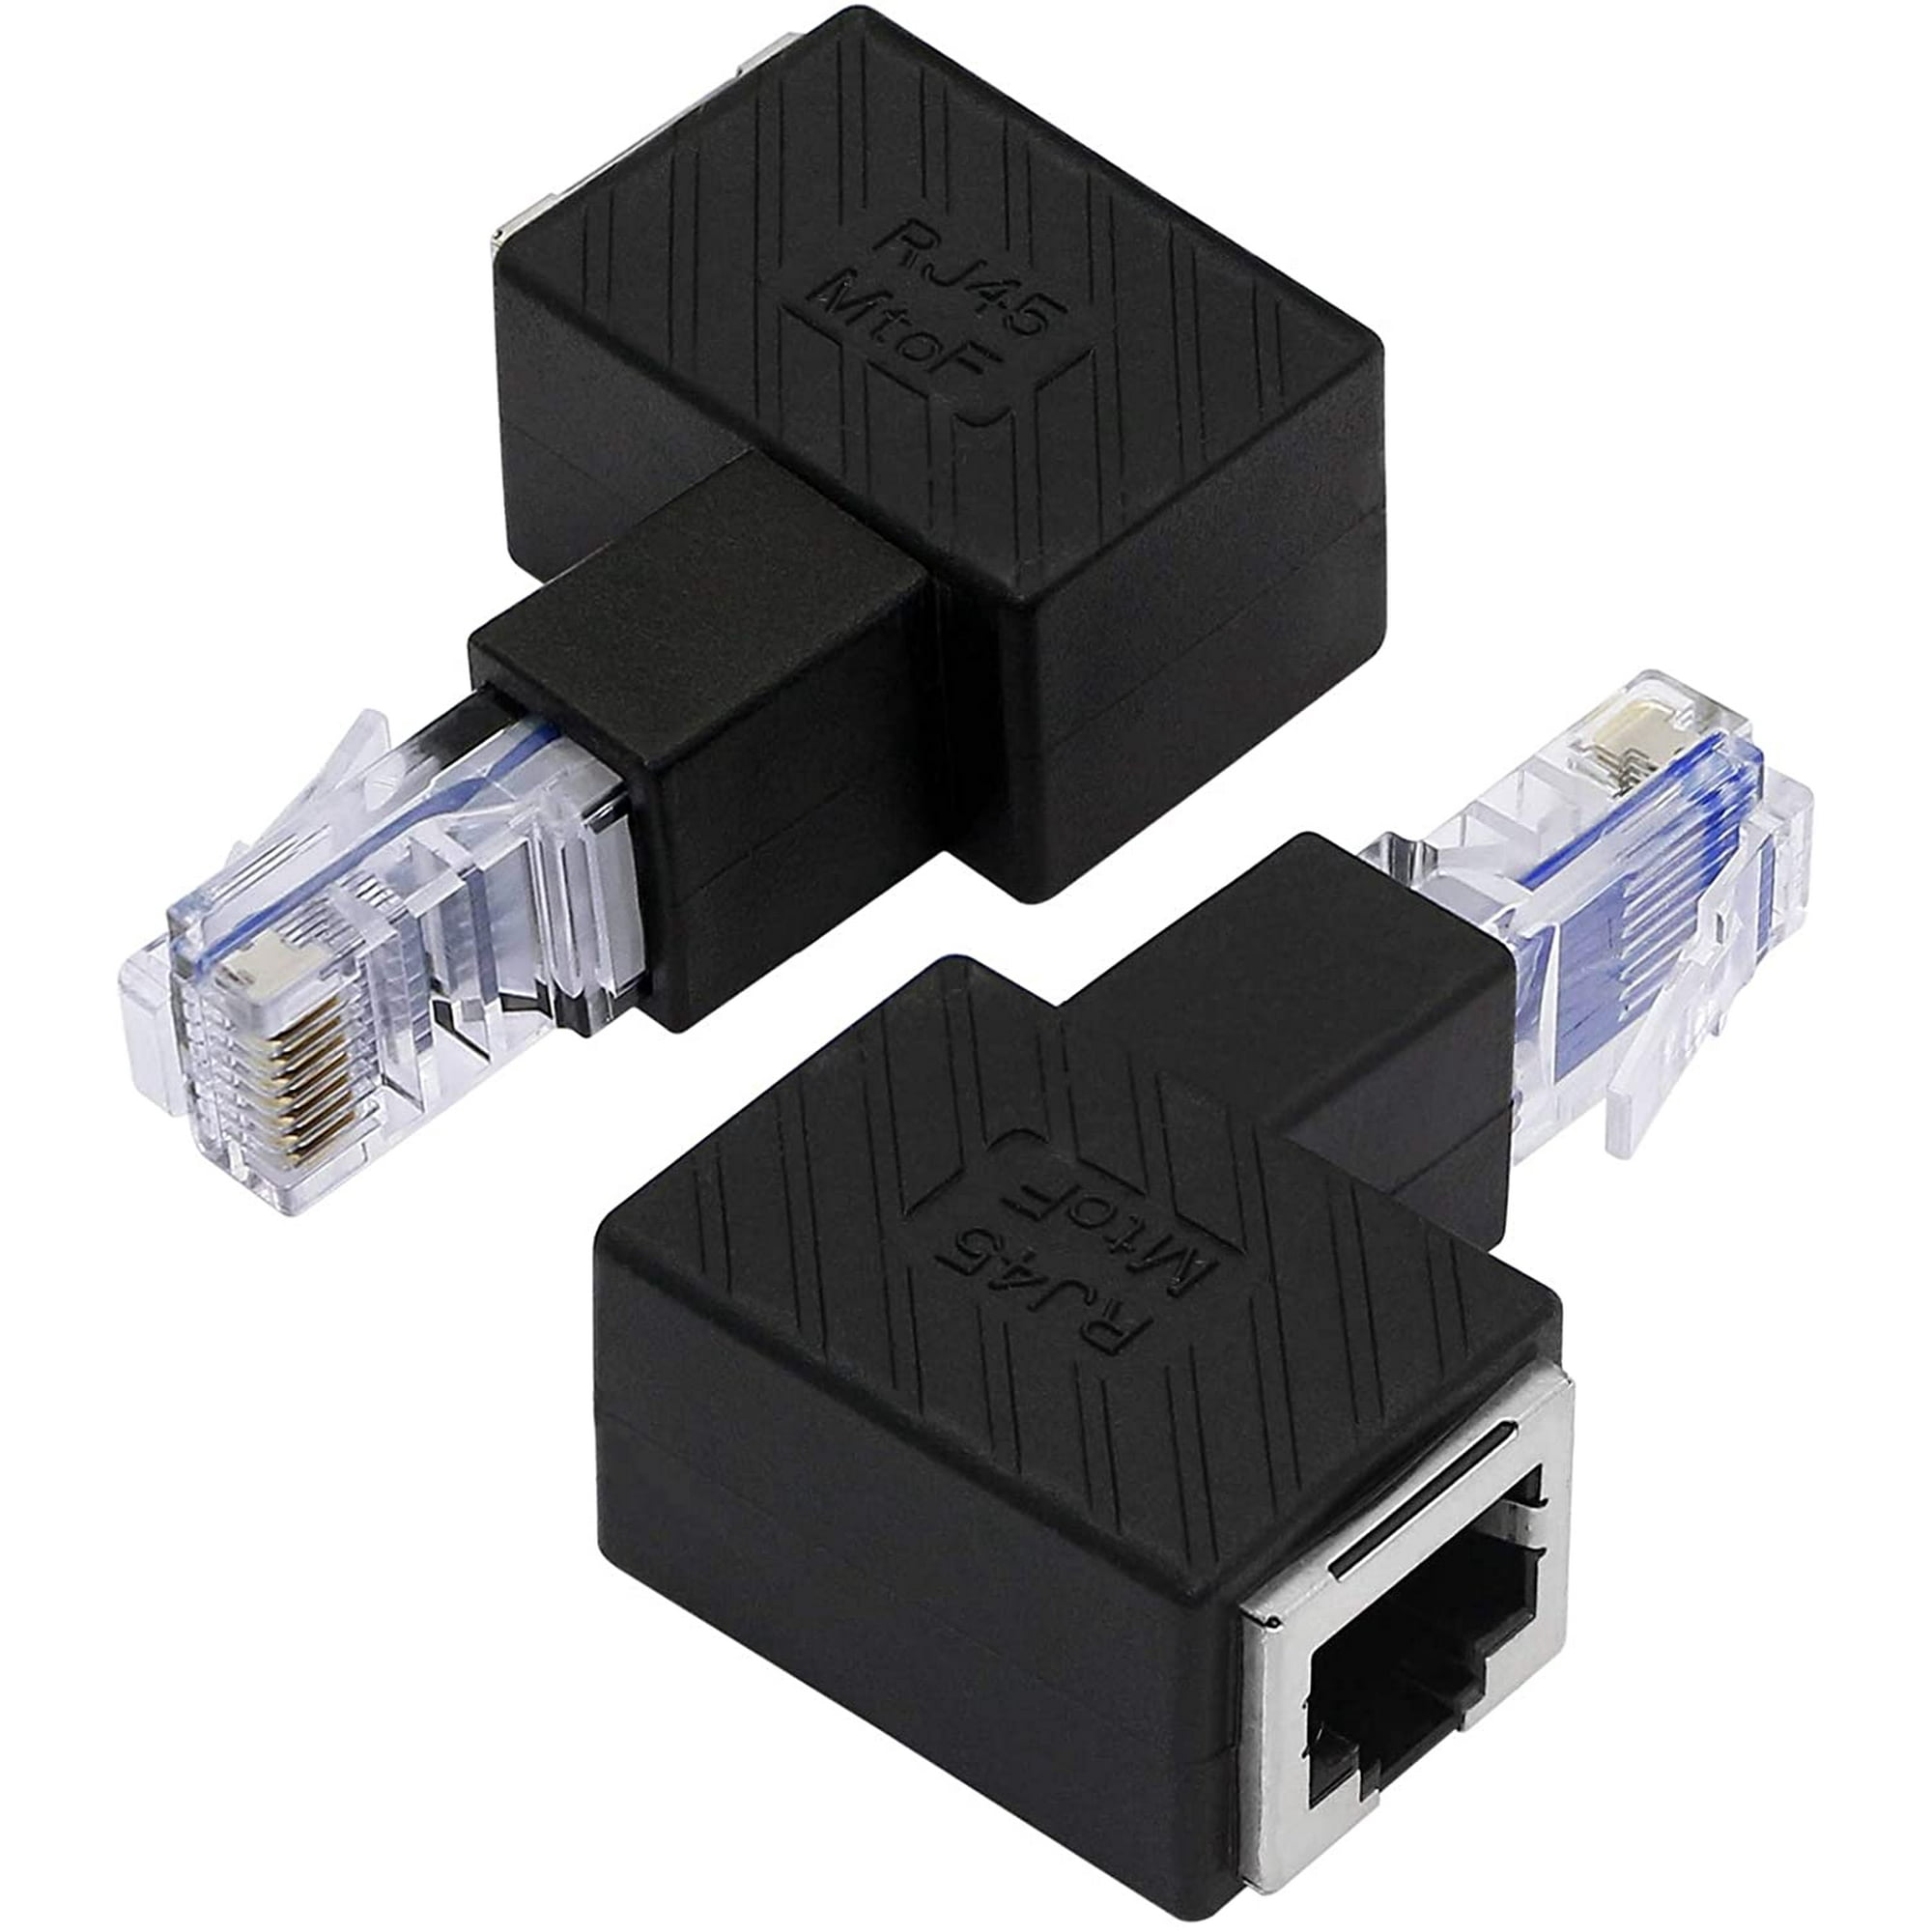 component betrouwbaarheid Spectaculair YACSEJAO Cat5e/Cat6 RJ45 Ethernet Adapter，2Pack 90 Degree Ethernet RJ45 /  8P8C Male to Female Right Angle Adapter | Walmart Canada